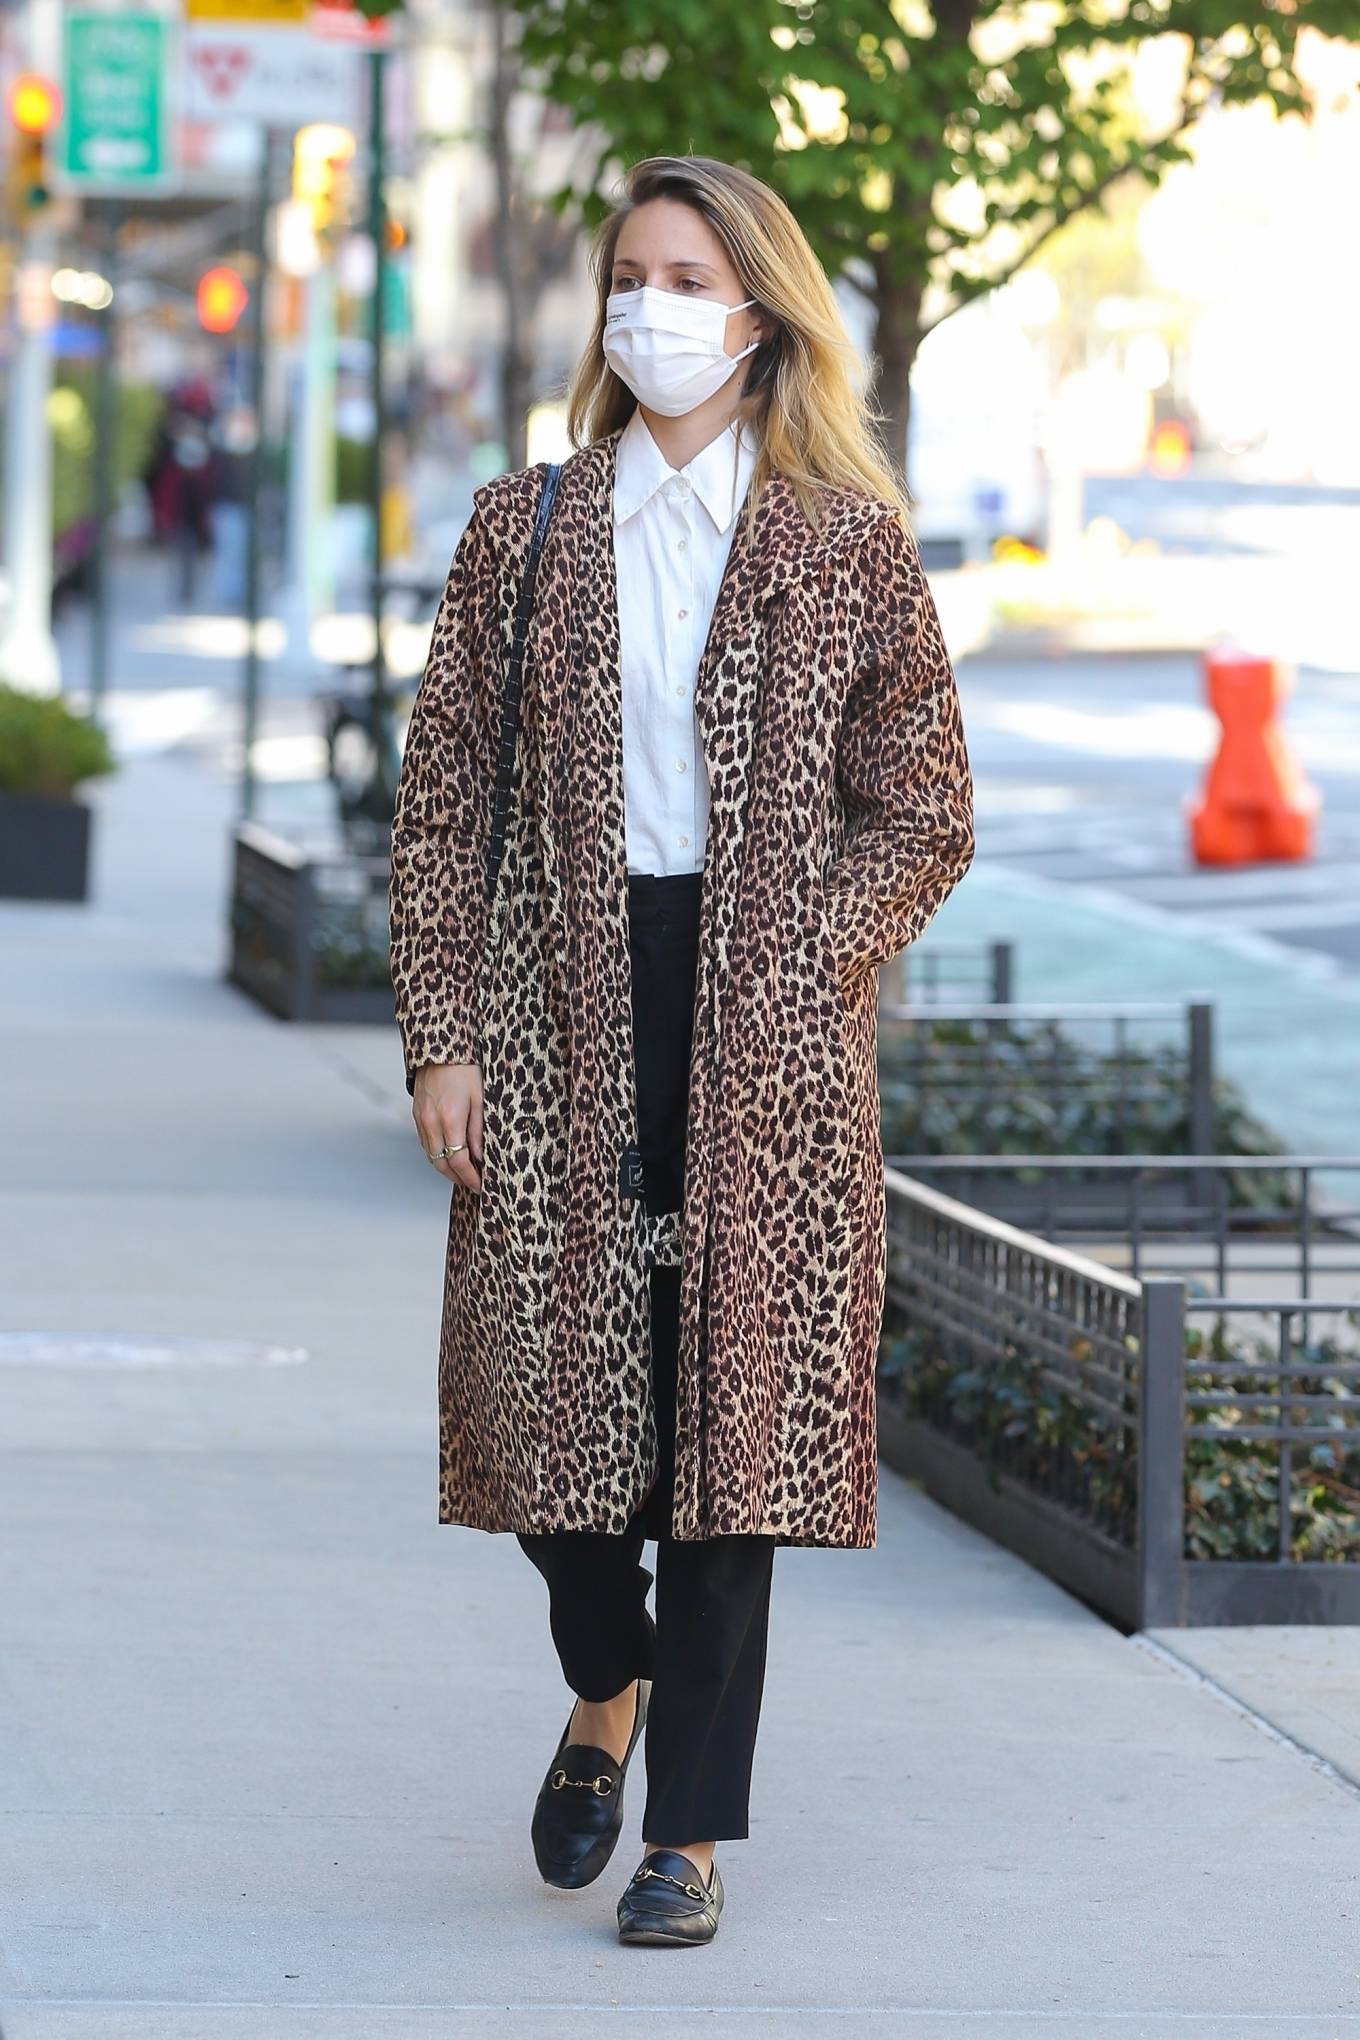 Dianna Agron 2021 : Dianna Agron – In a leopard print overcoat while out in New York-04